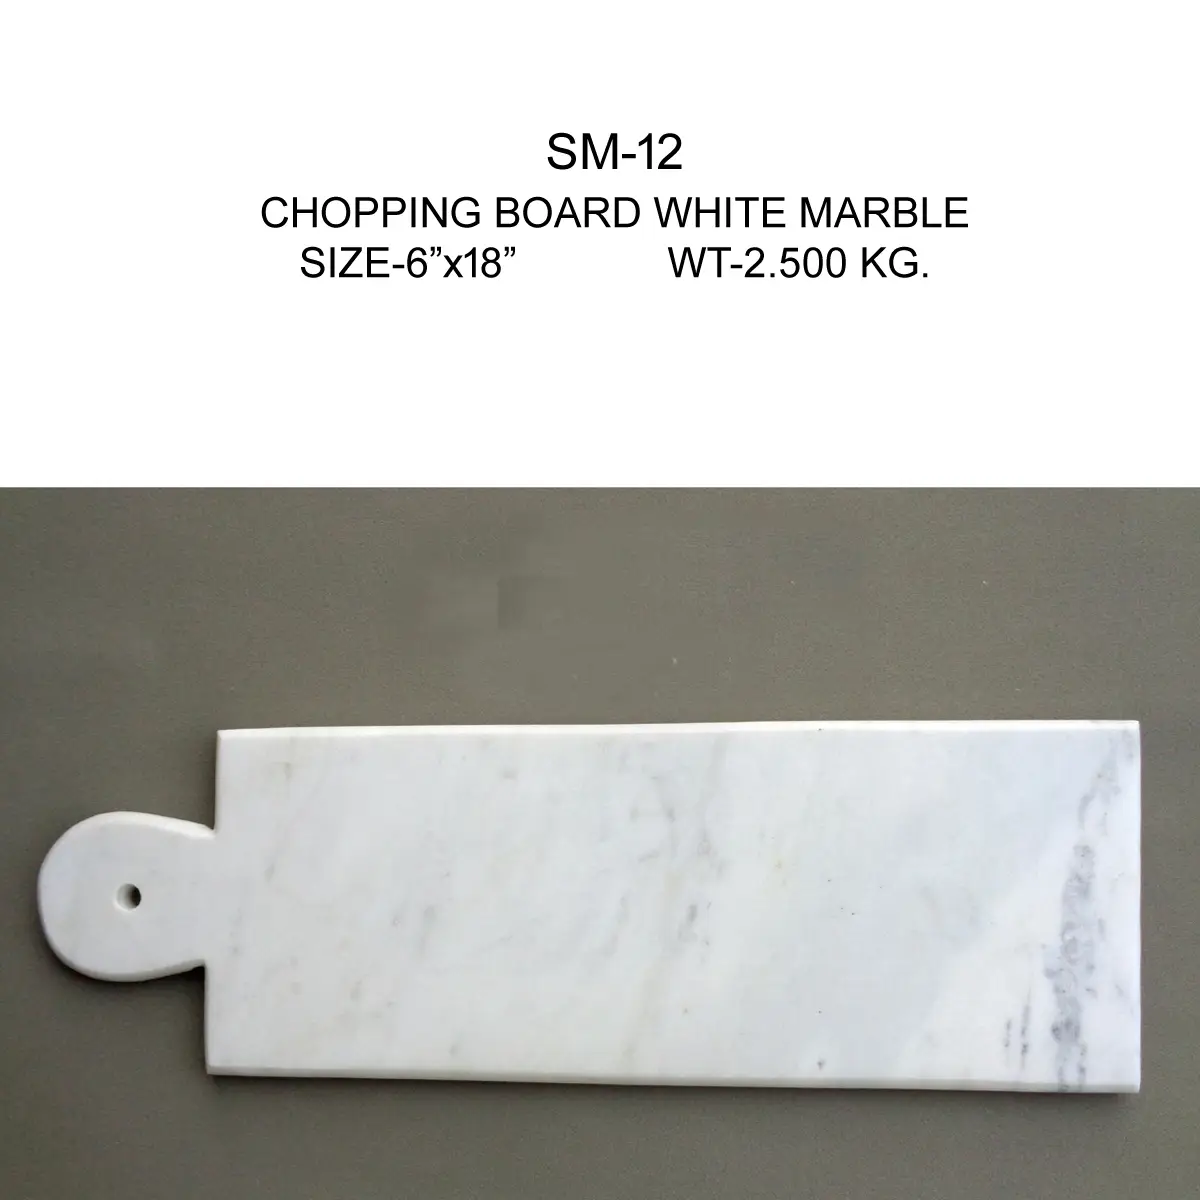 WHITE MARBLE RECTANGLE MOLDING
CHOPPING BOARD WITH
HANDLE